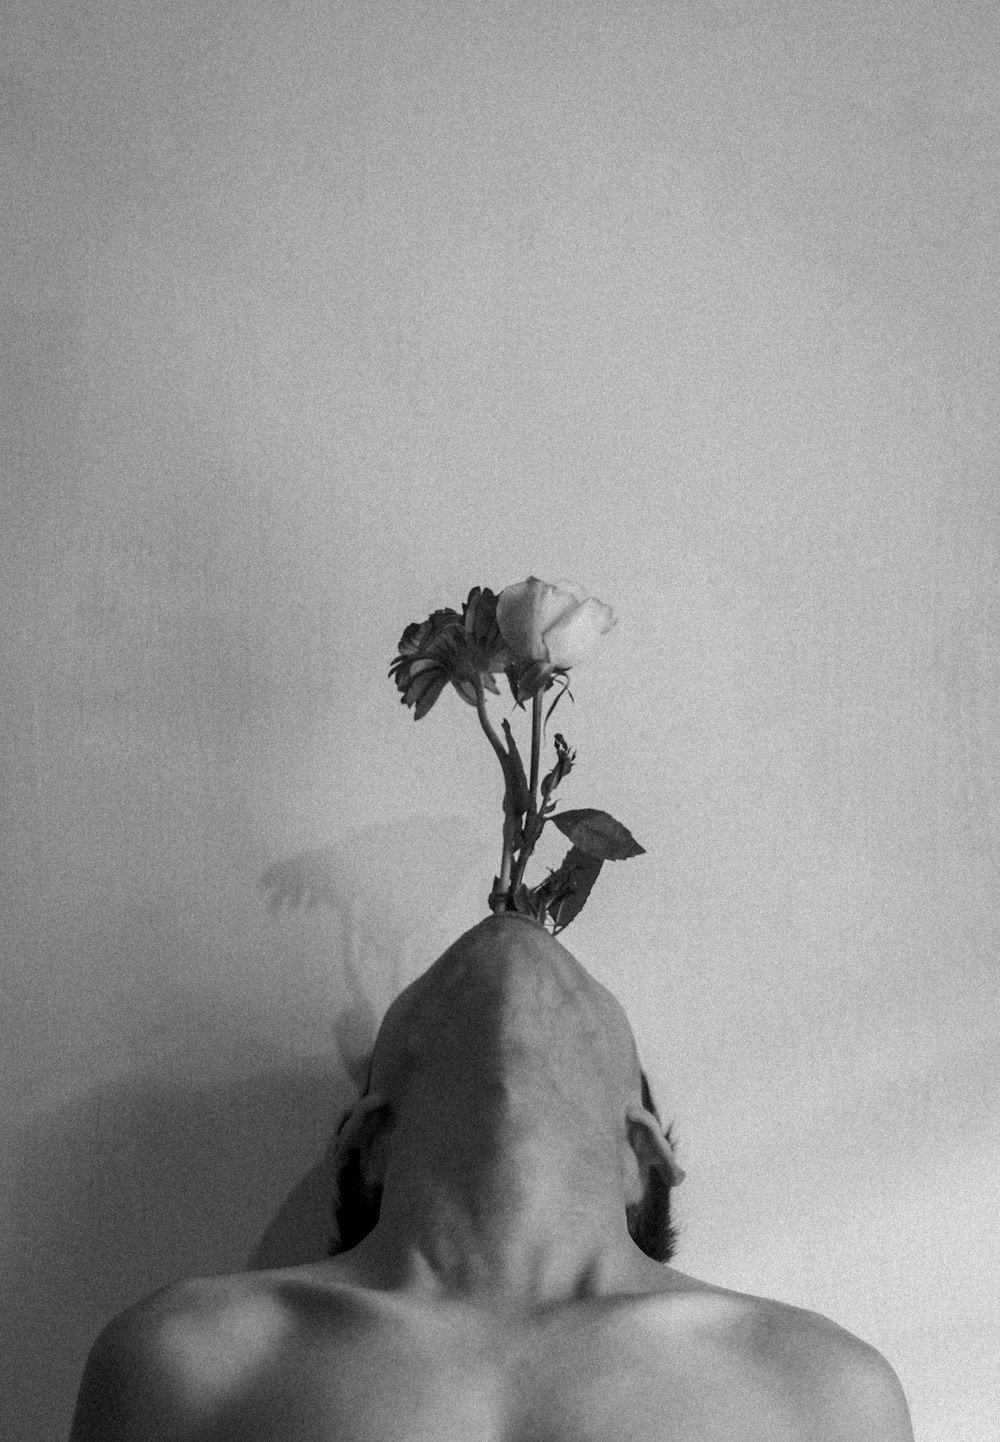 grayscale photo of man holding flower